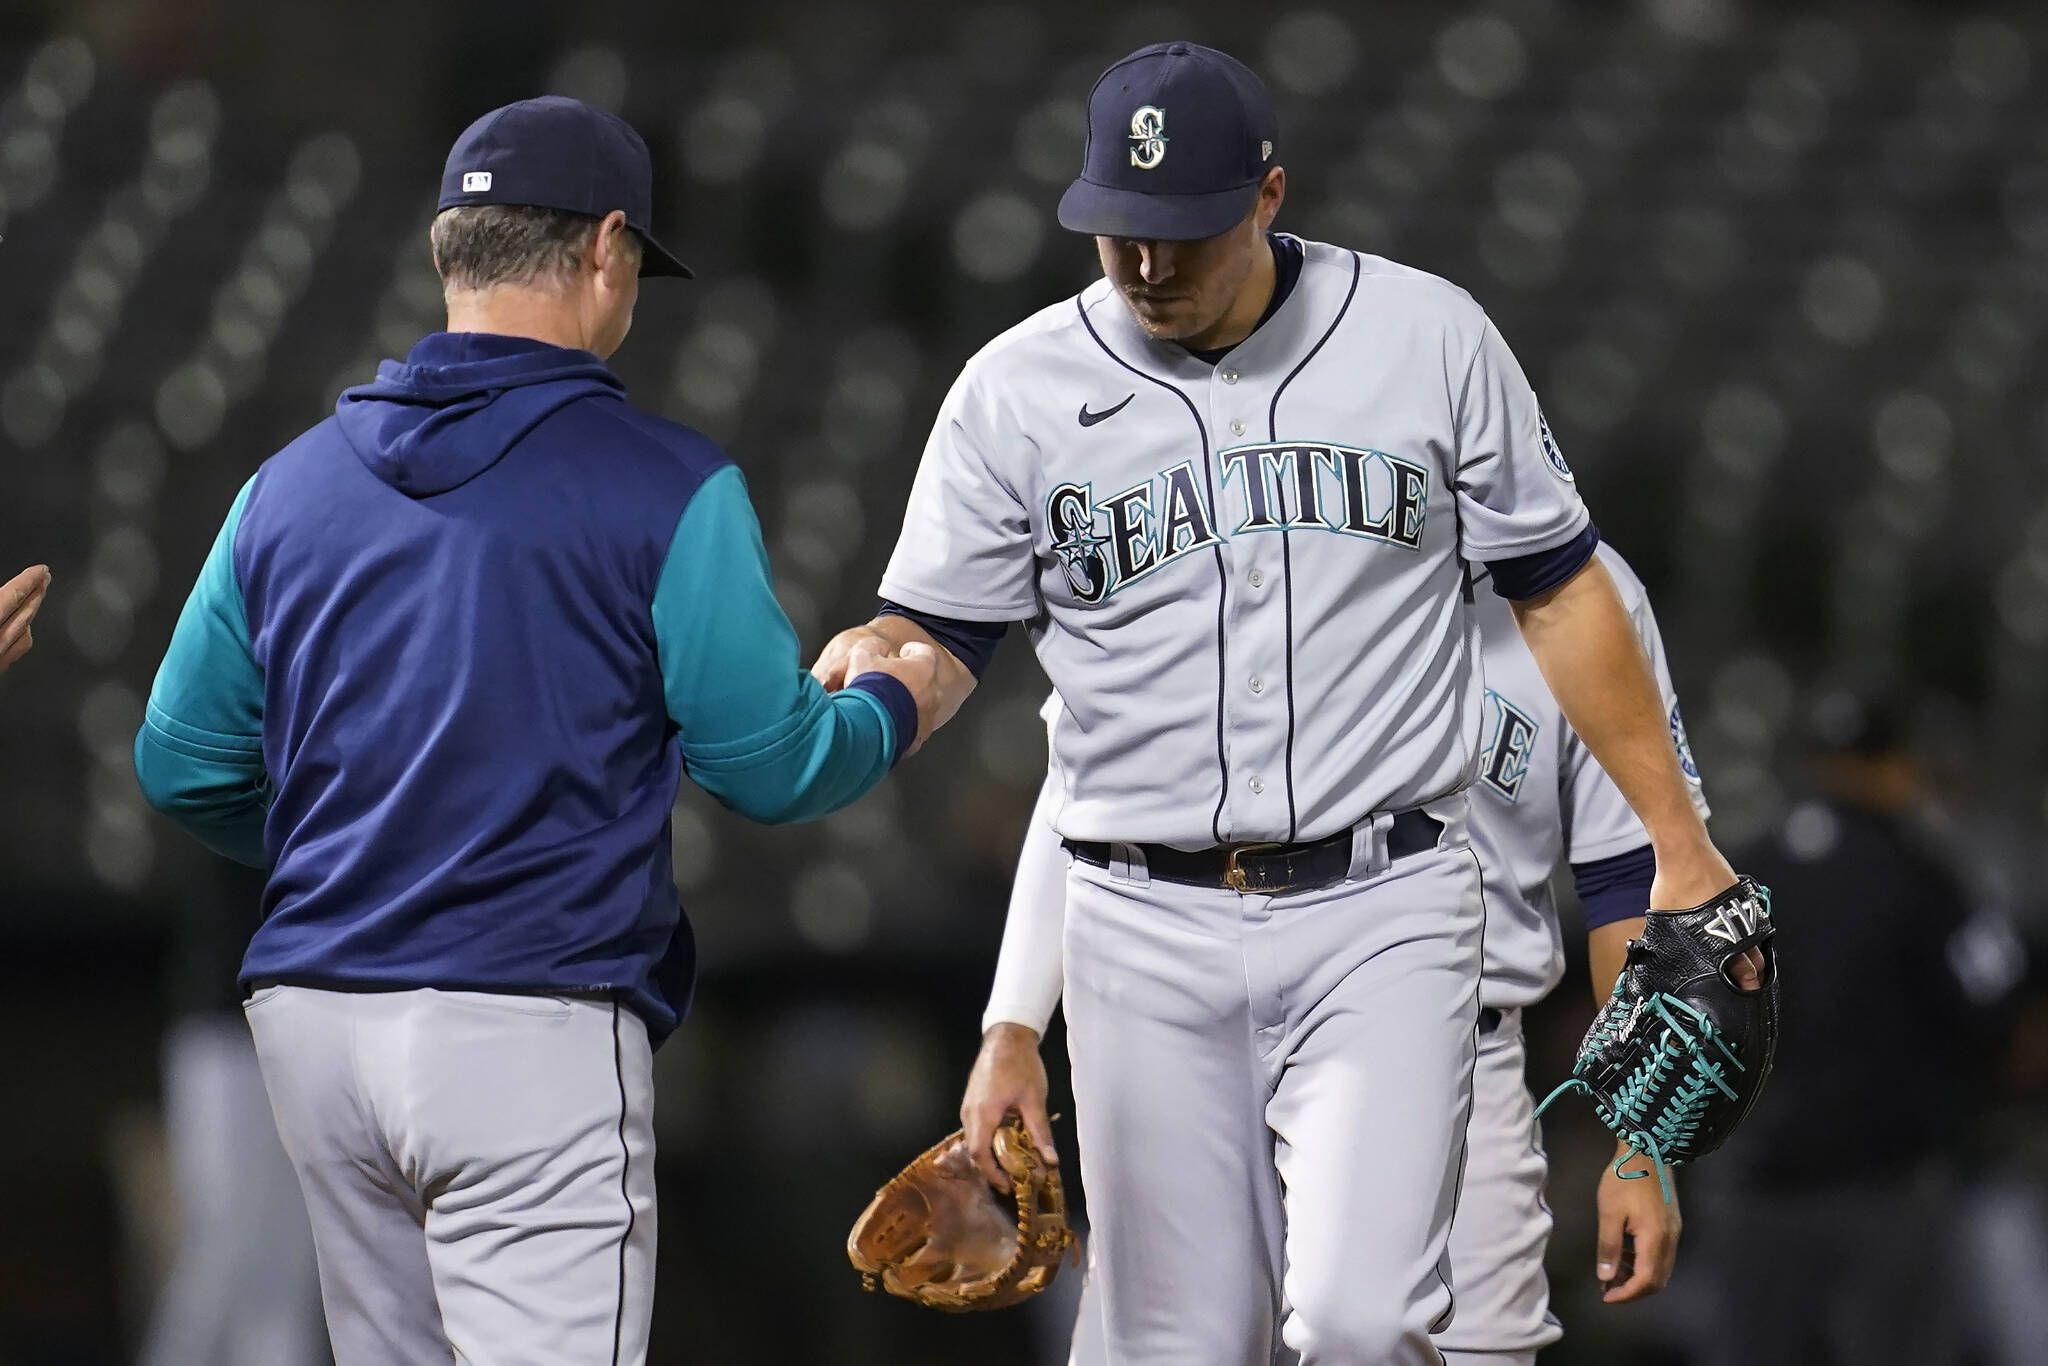 Mariners manager Scott Servais (left) takes the ball from pitcher Erik Swanson during the seventh inning of a game against the Athletics on Wednesday in Oakland, Calif. (AP Photo/Jeff Chiu)